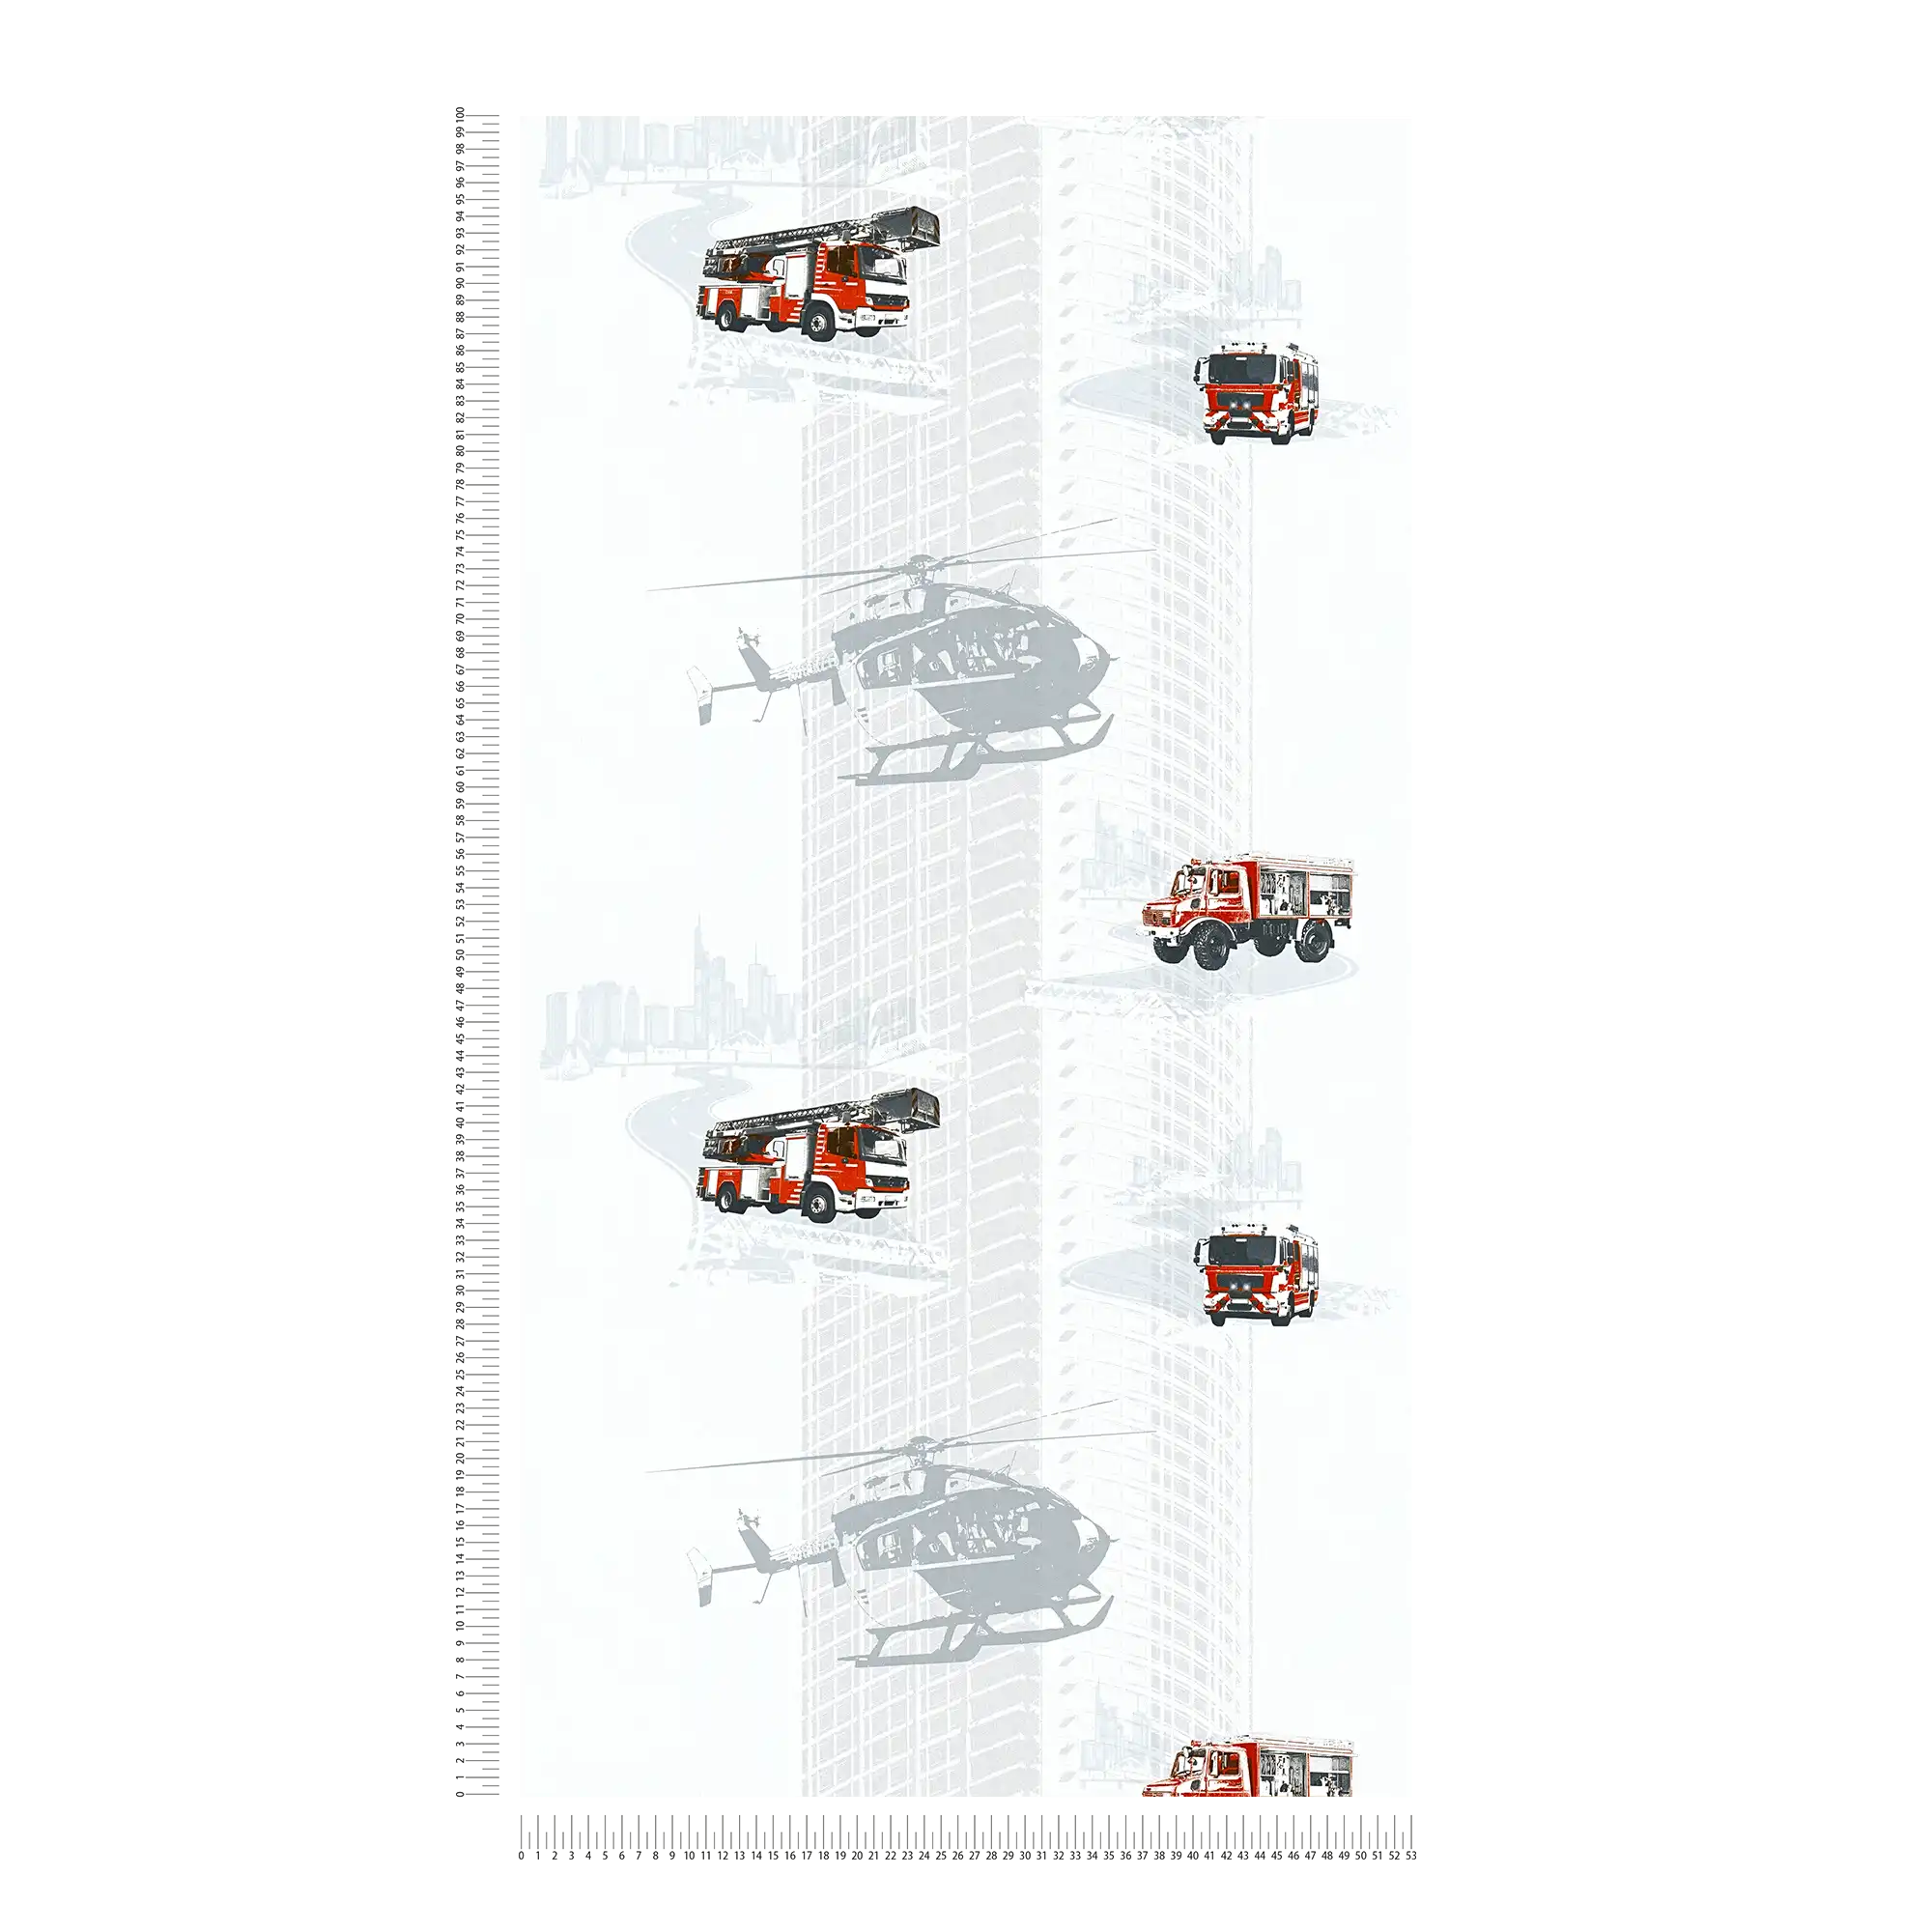             Kids room wallpaper fire department pattern for boys - grey, red, black
        